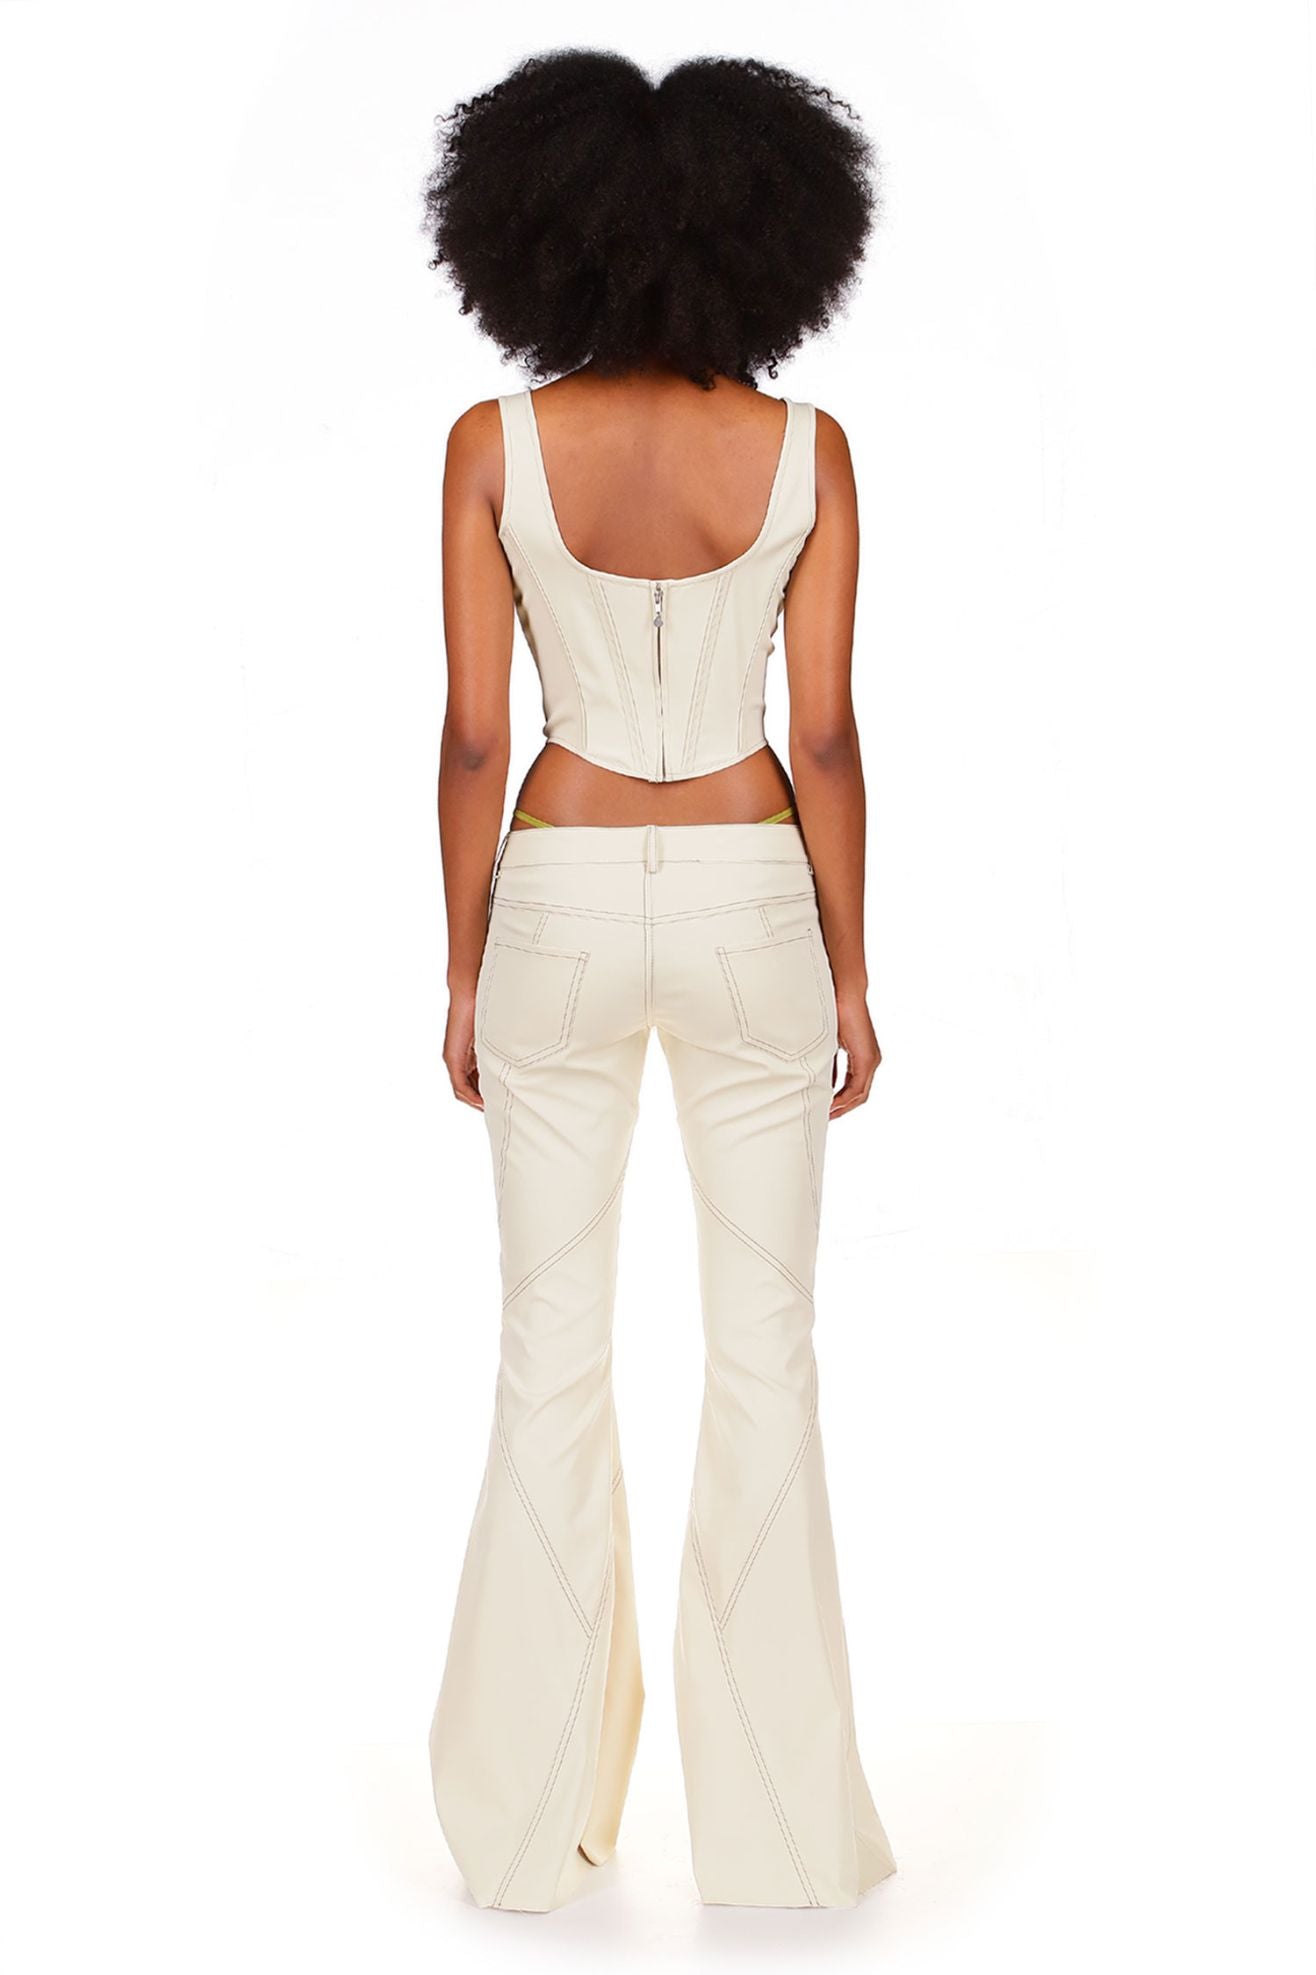 Sesame White Lace Up Flared Pants